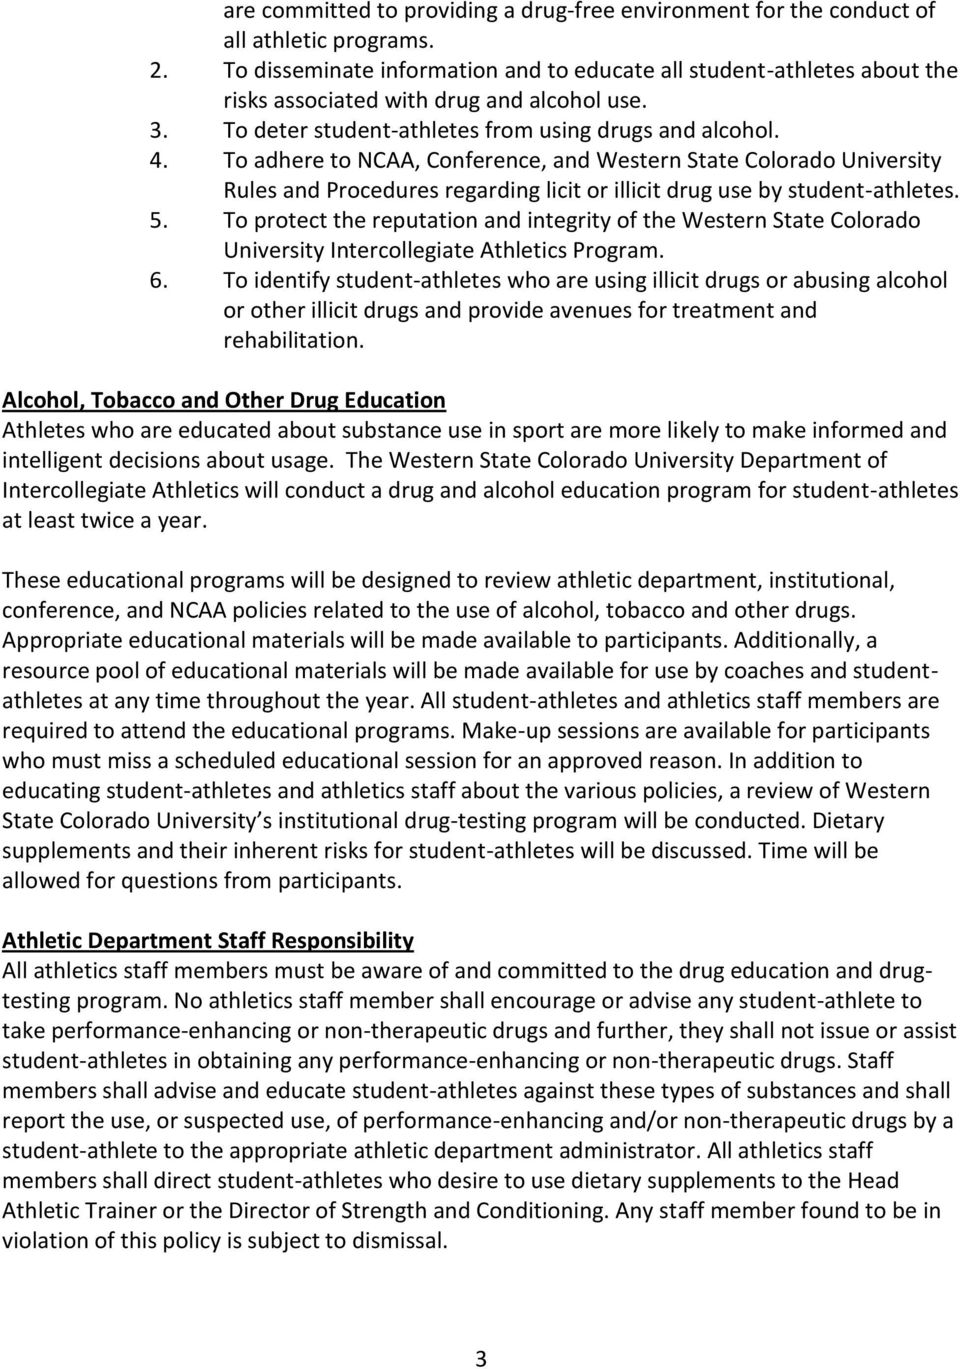 To adhere to NCAA, Conference, and Western State Colorado University Rules and Procedures regarding licit or illicit drug use by student-athletes. 5.